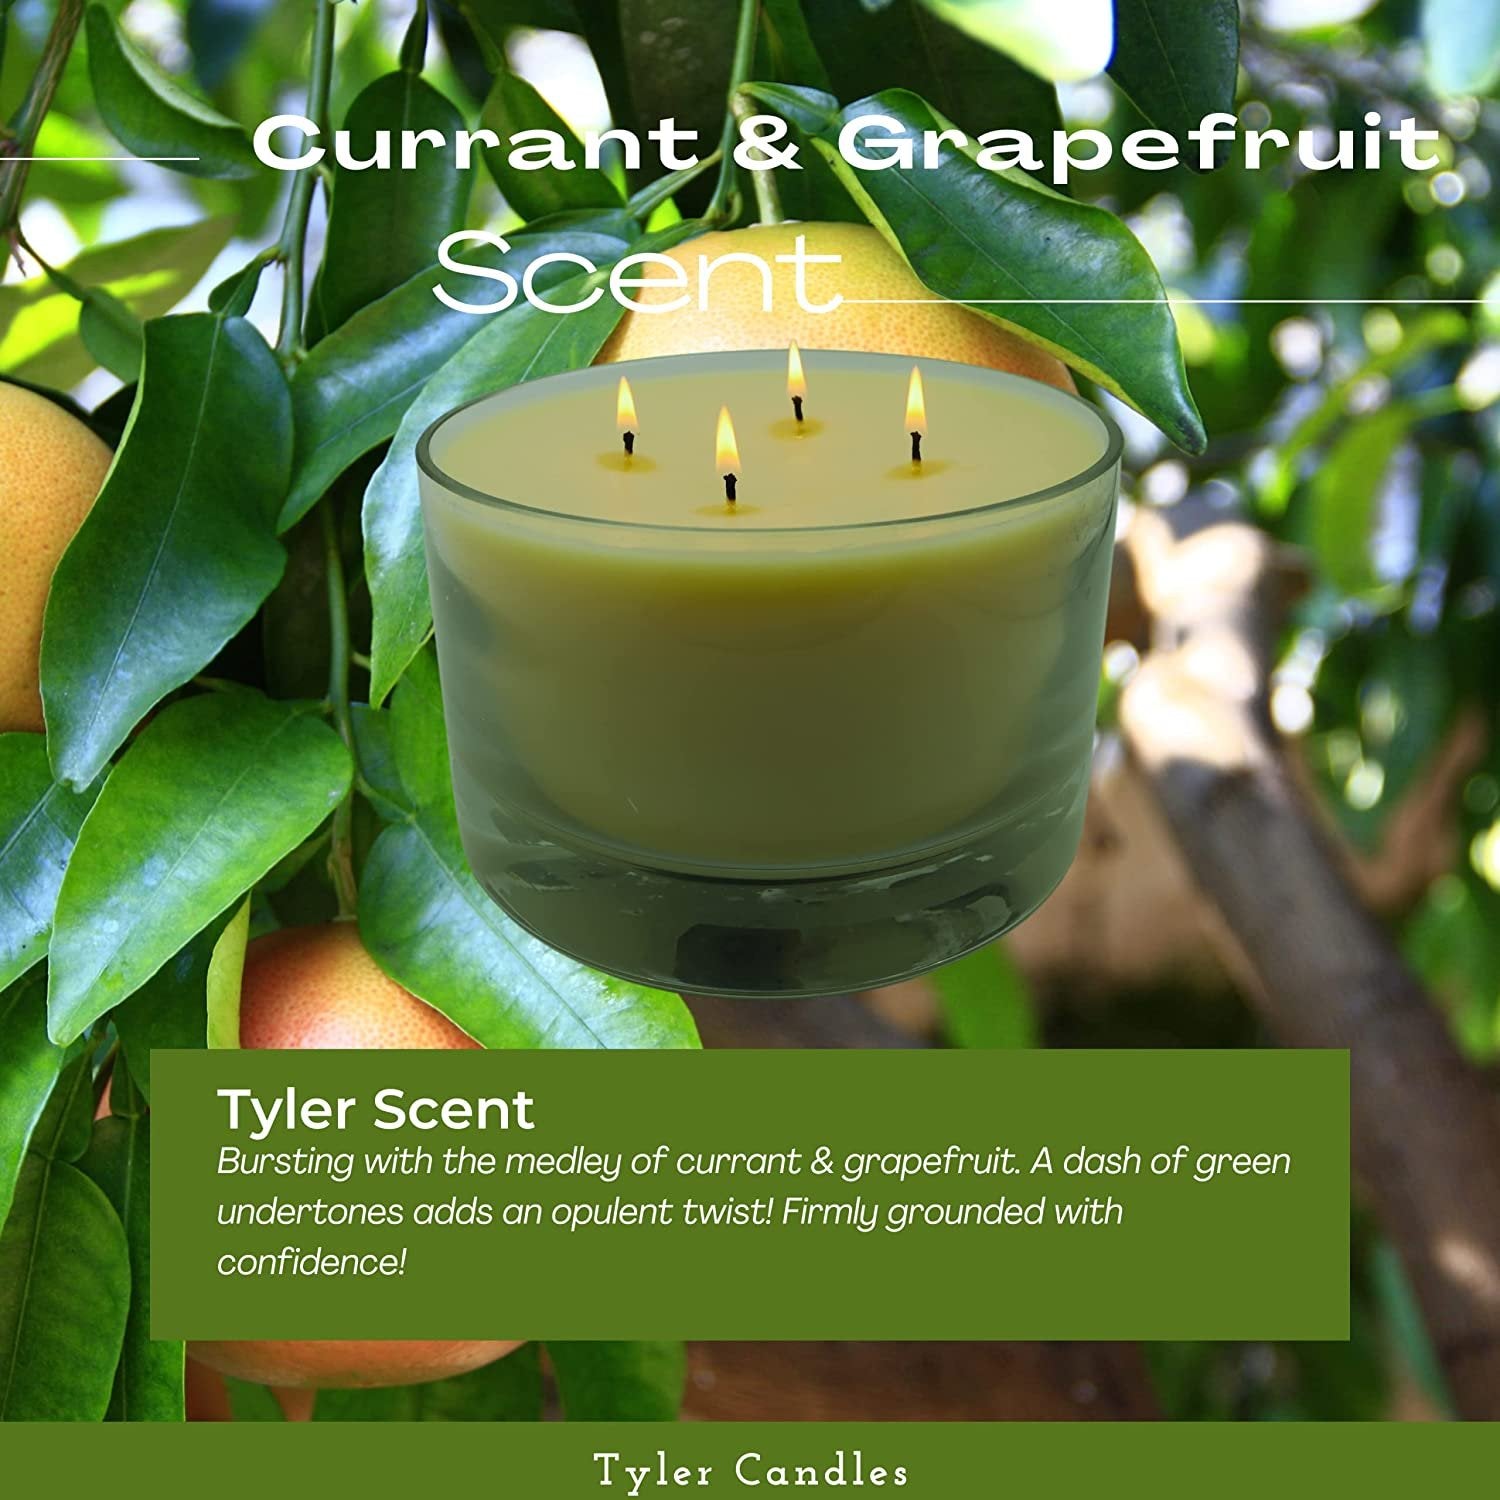 American-Made Candles from the Tyler Candle Company